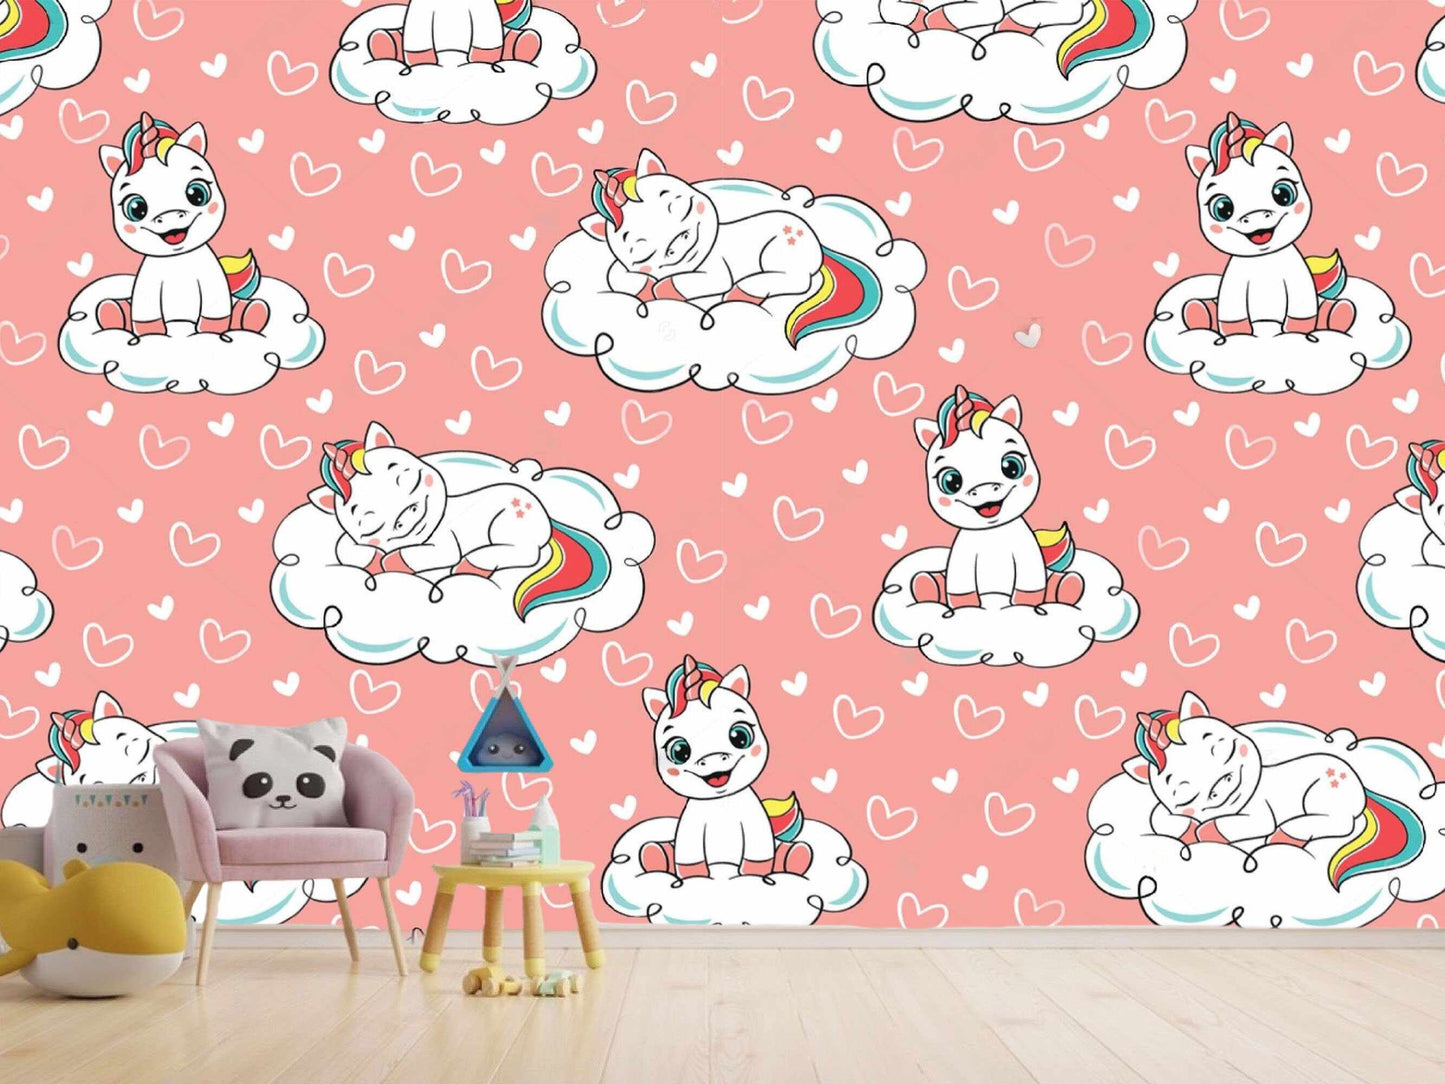 Whimsical unicorn wall decor in a kids' room, sparking imagination and joy.